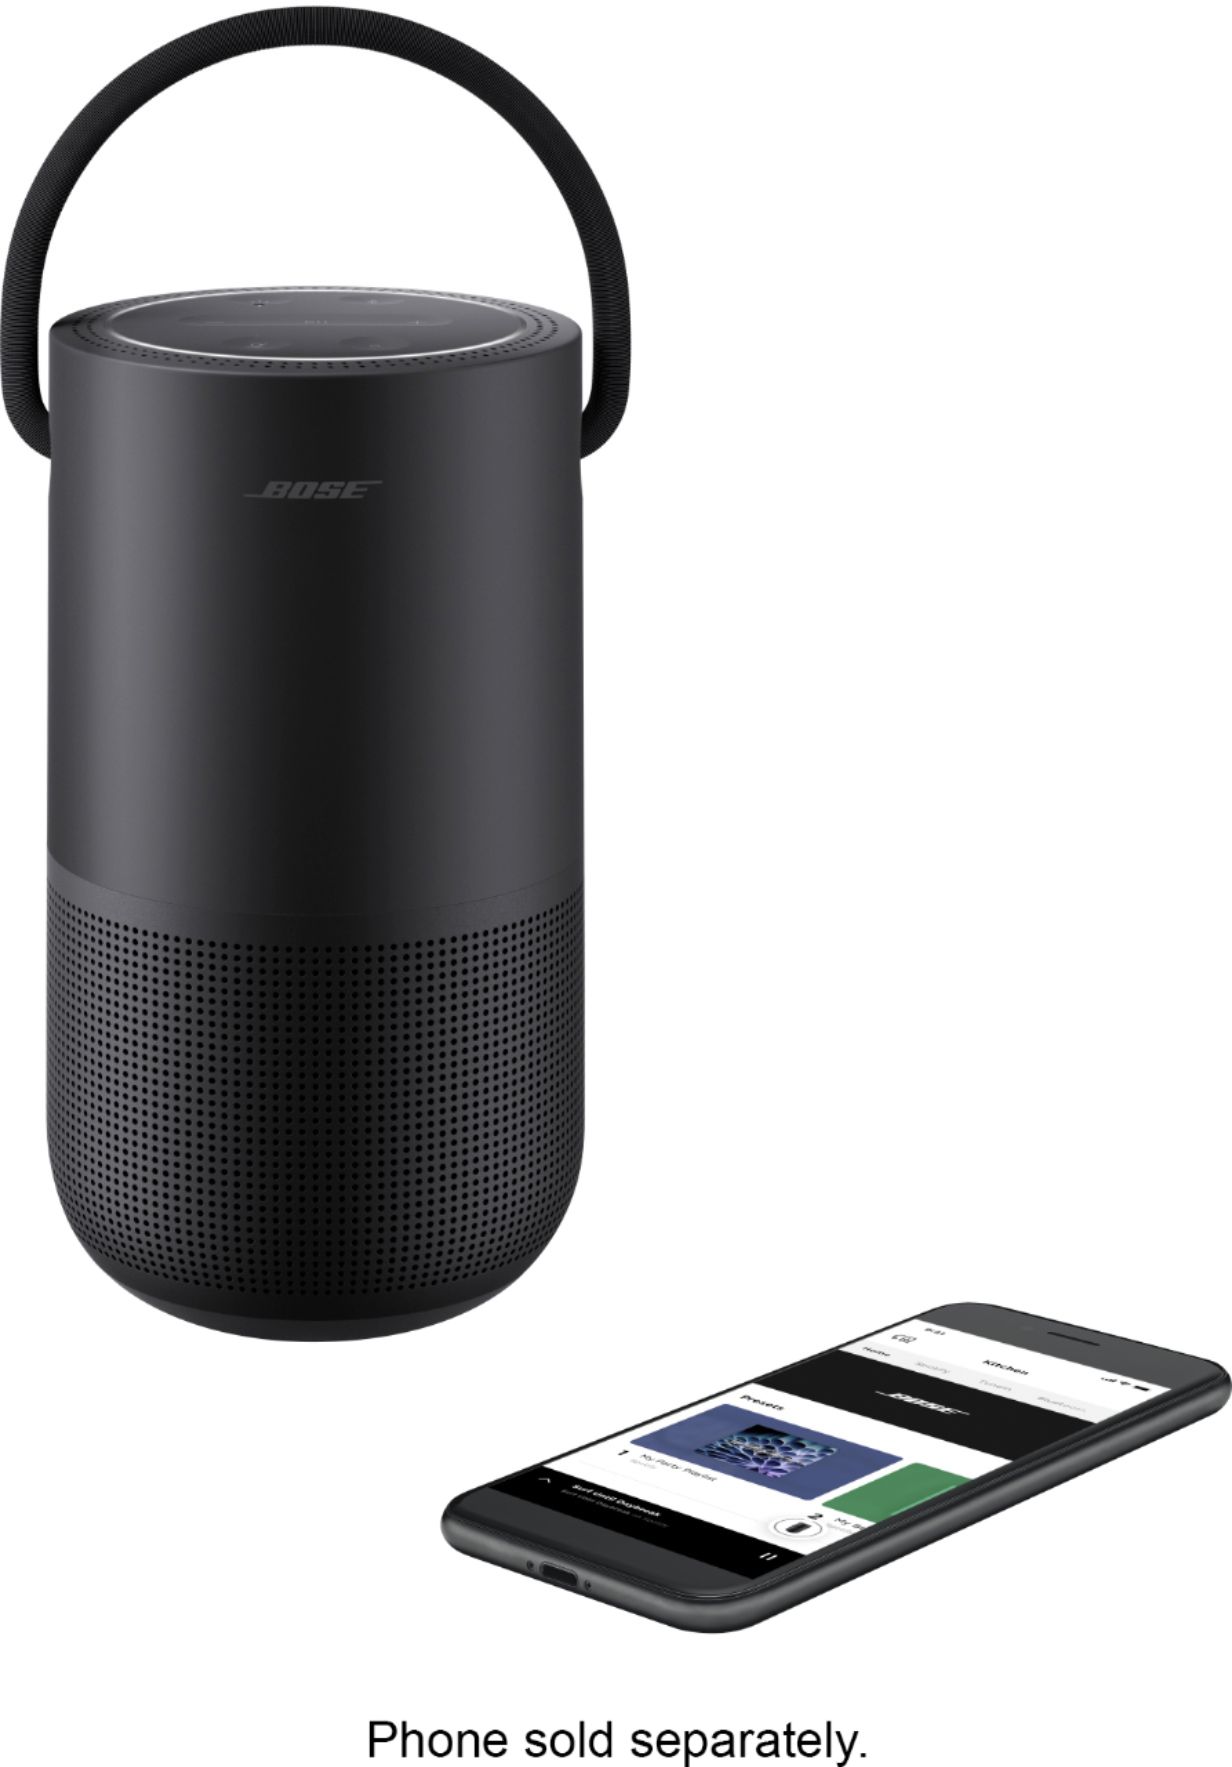 Bose Portable Smart Speaker with built-in WiFi, Bluetooth, Google